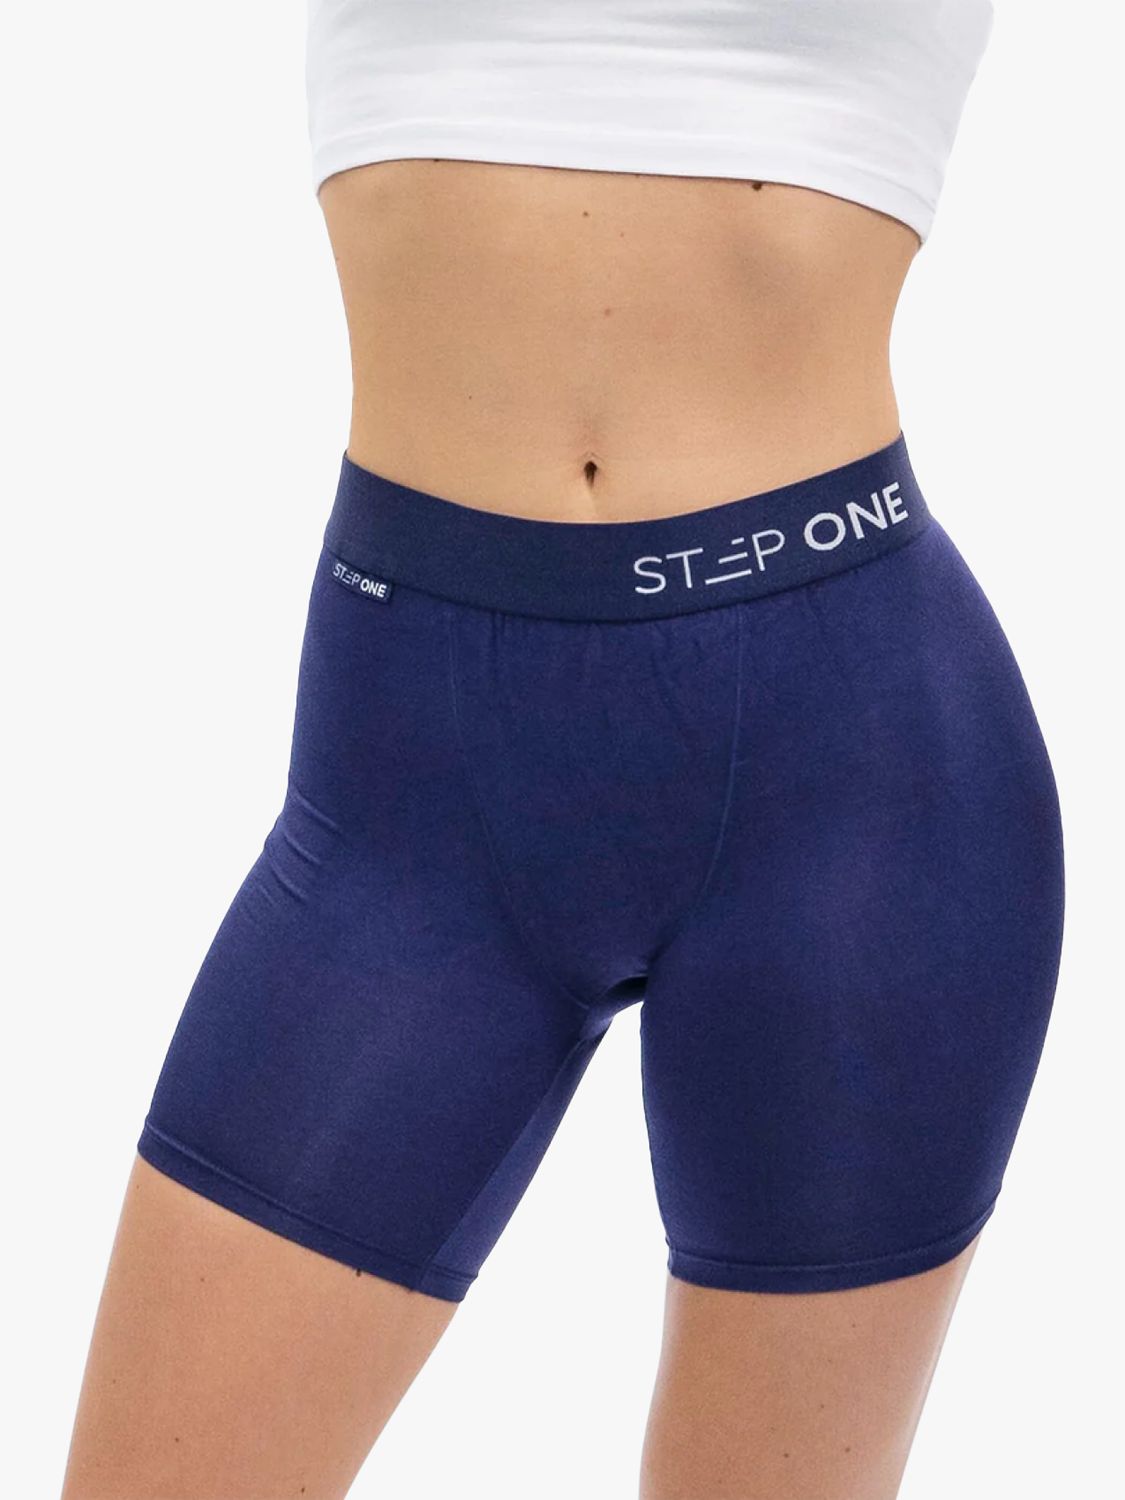 Buy Step One Bamboo Body Shorts, Pack of 3 Online at johnlewis.com